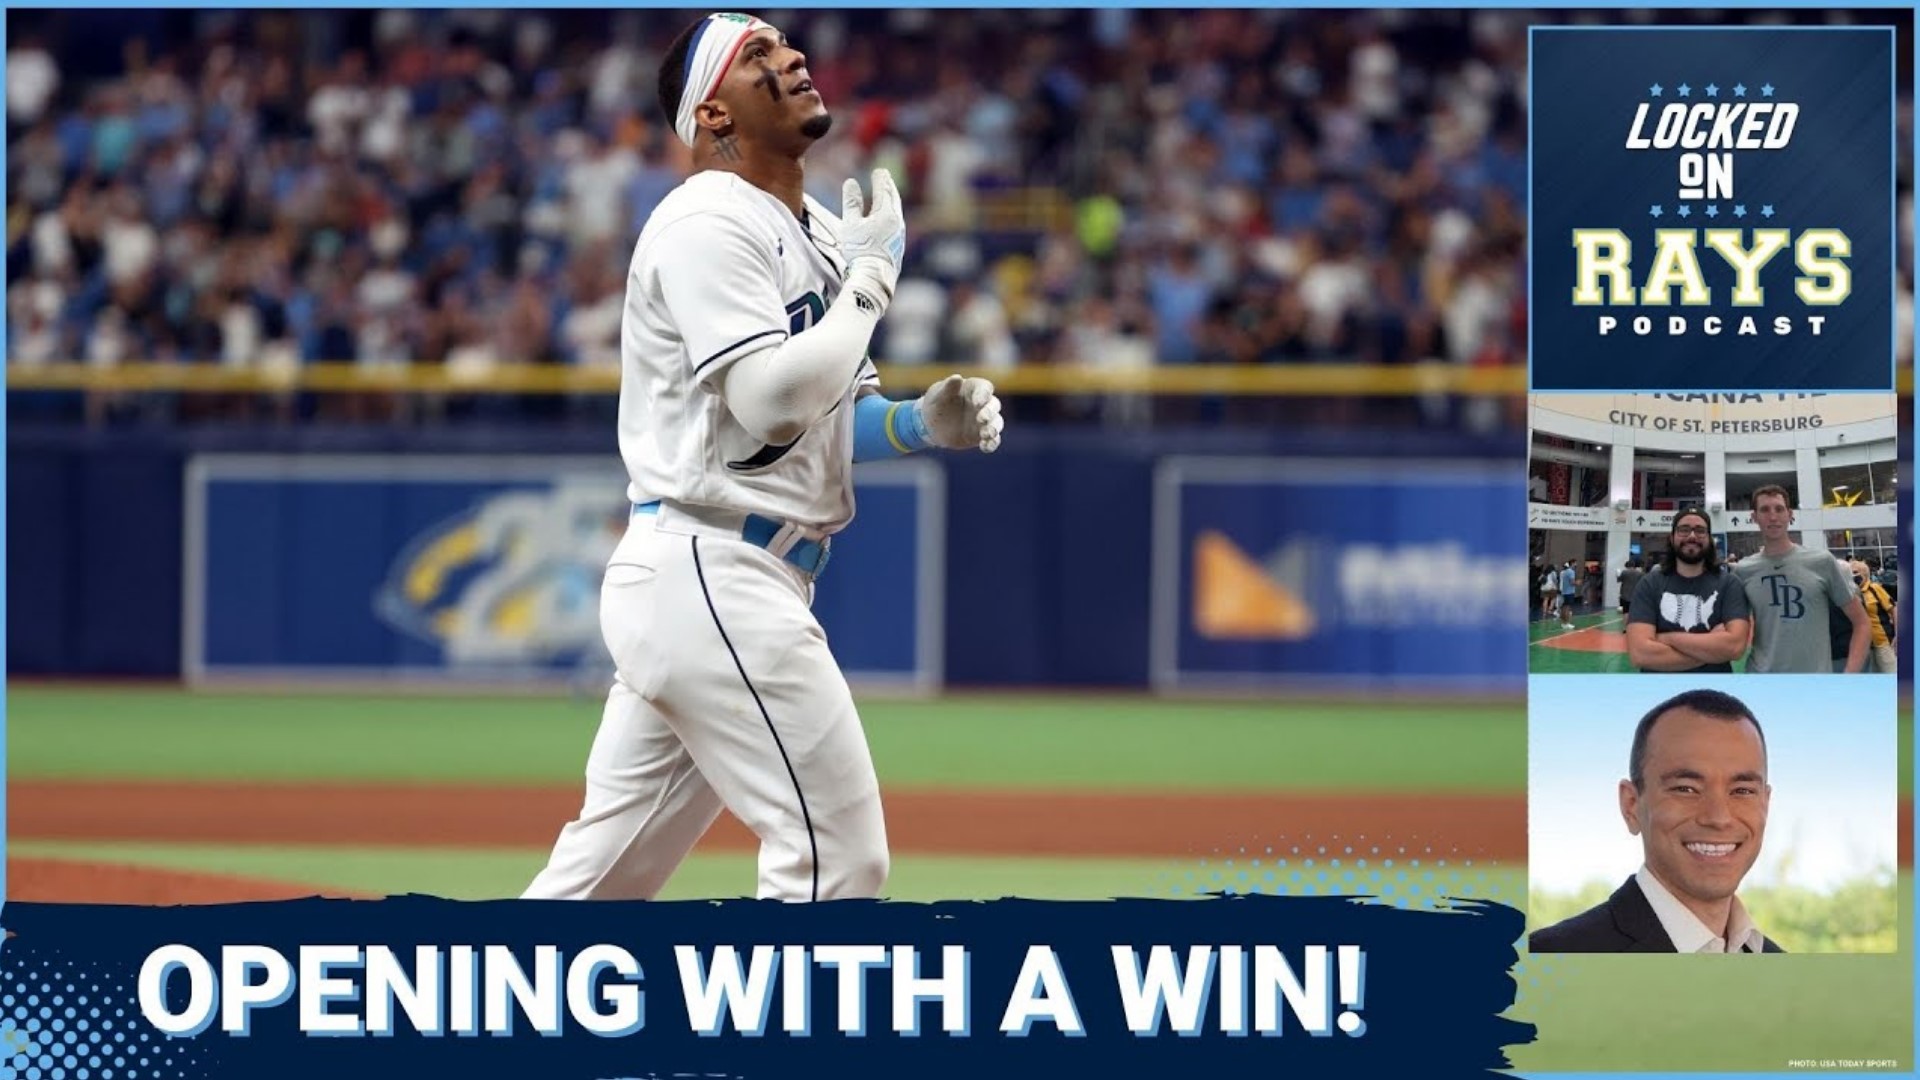 The Tampa Bay Rays were able to start the 2023 season successfully as they defeated the Detroit Tigers 4-0.